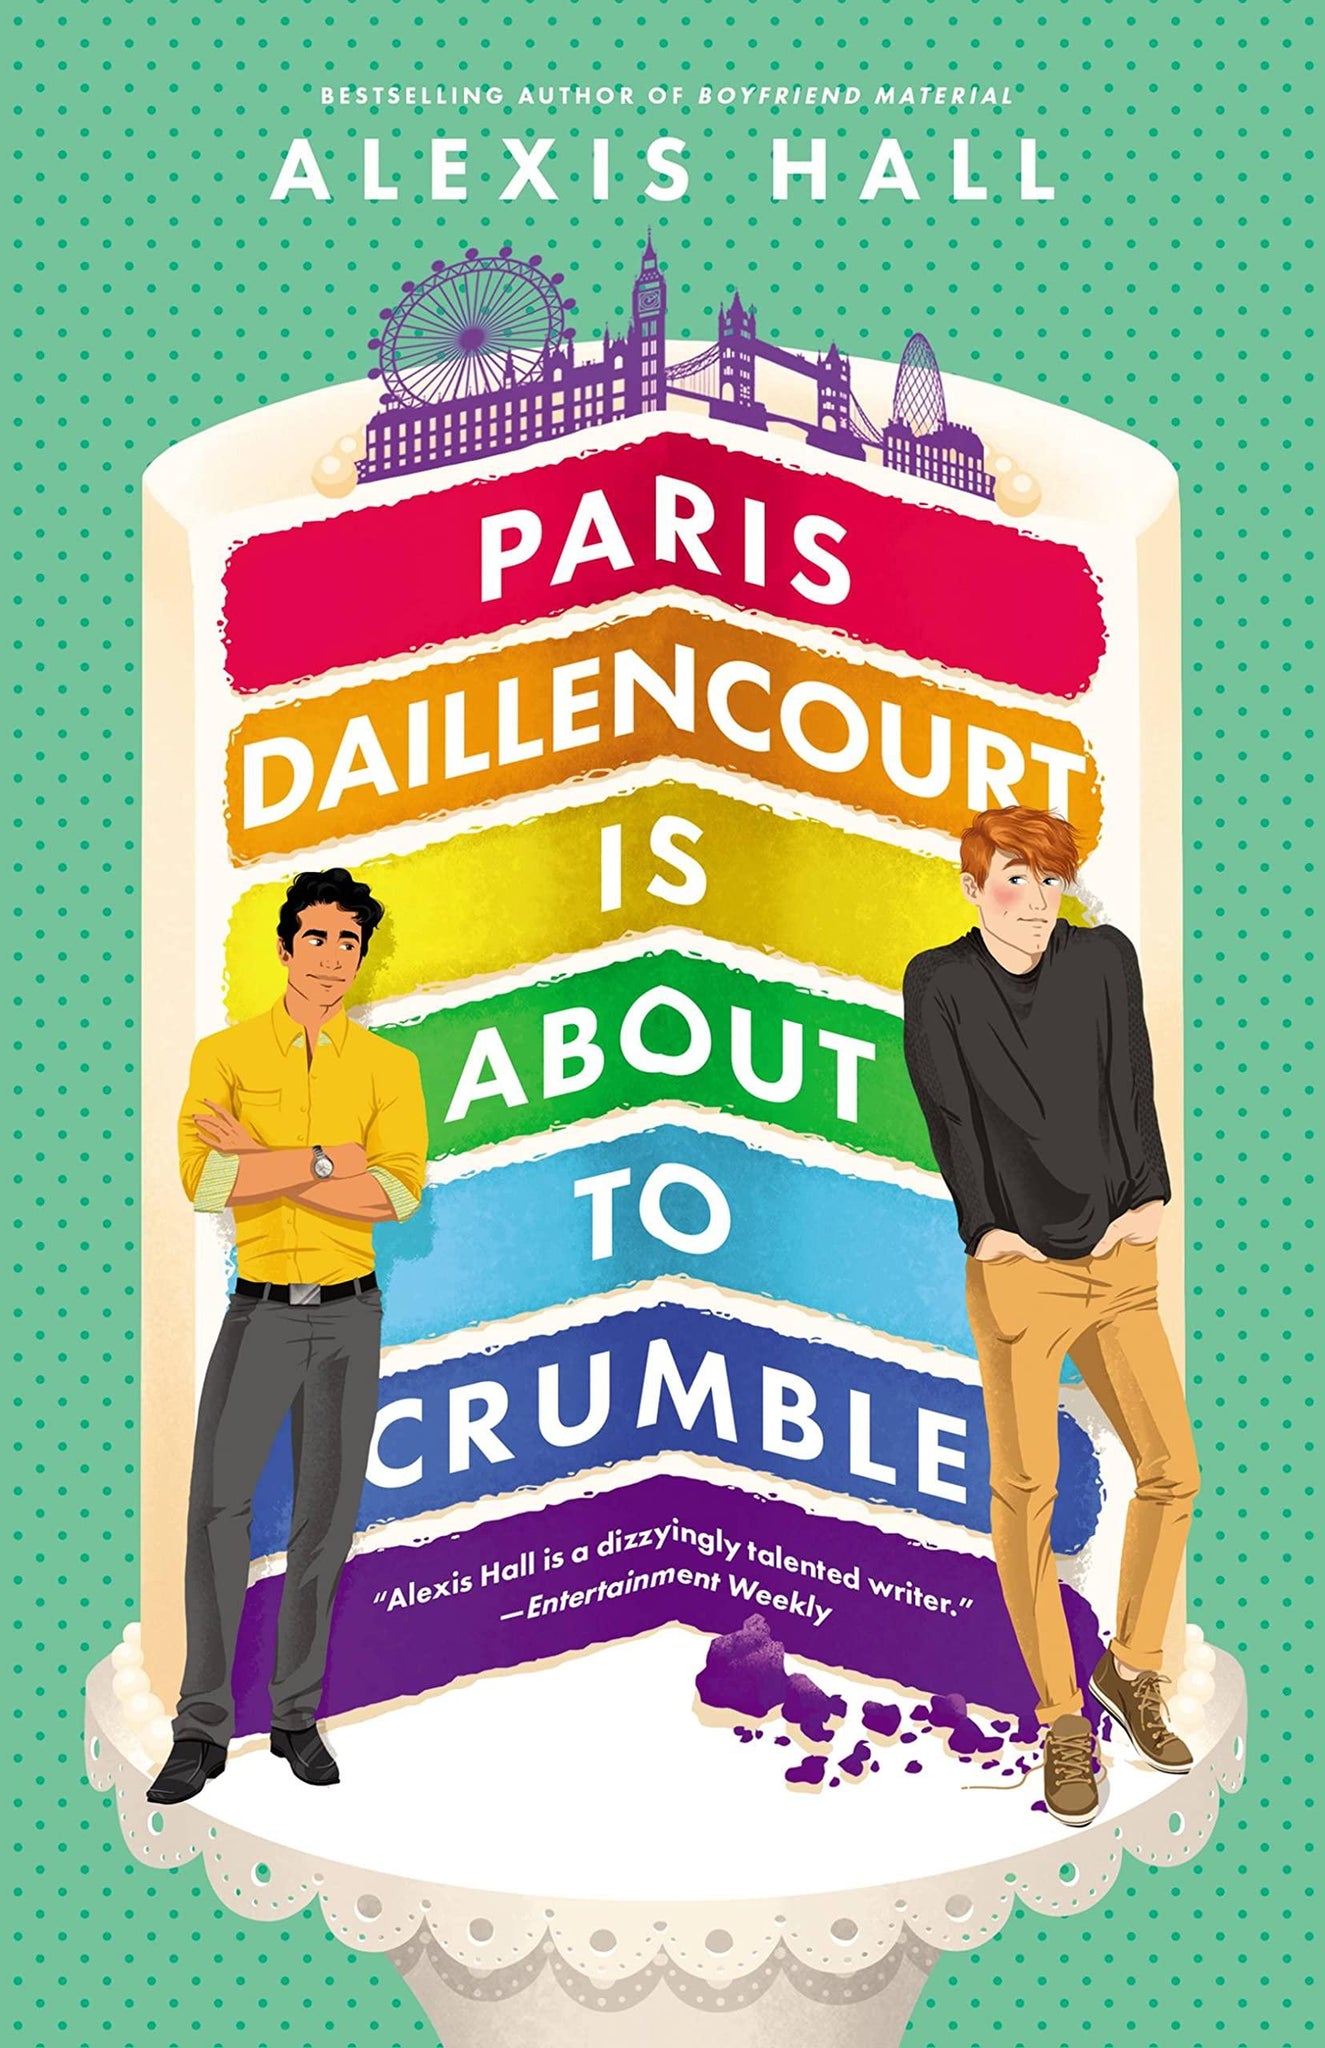 Paris Daillencourt Is about to Crumble - ShopQueer.co